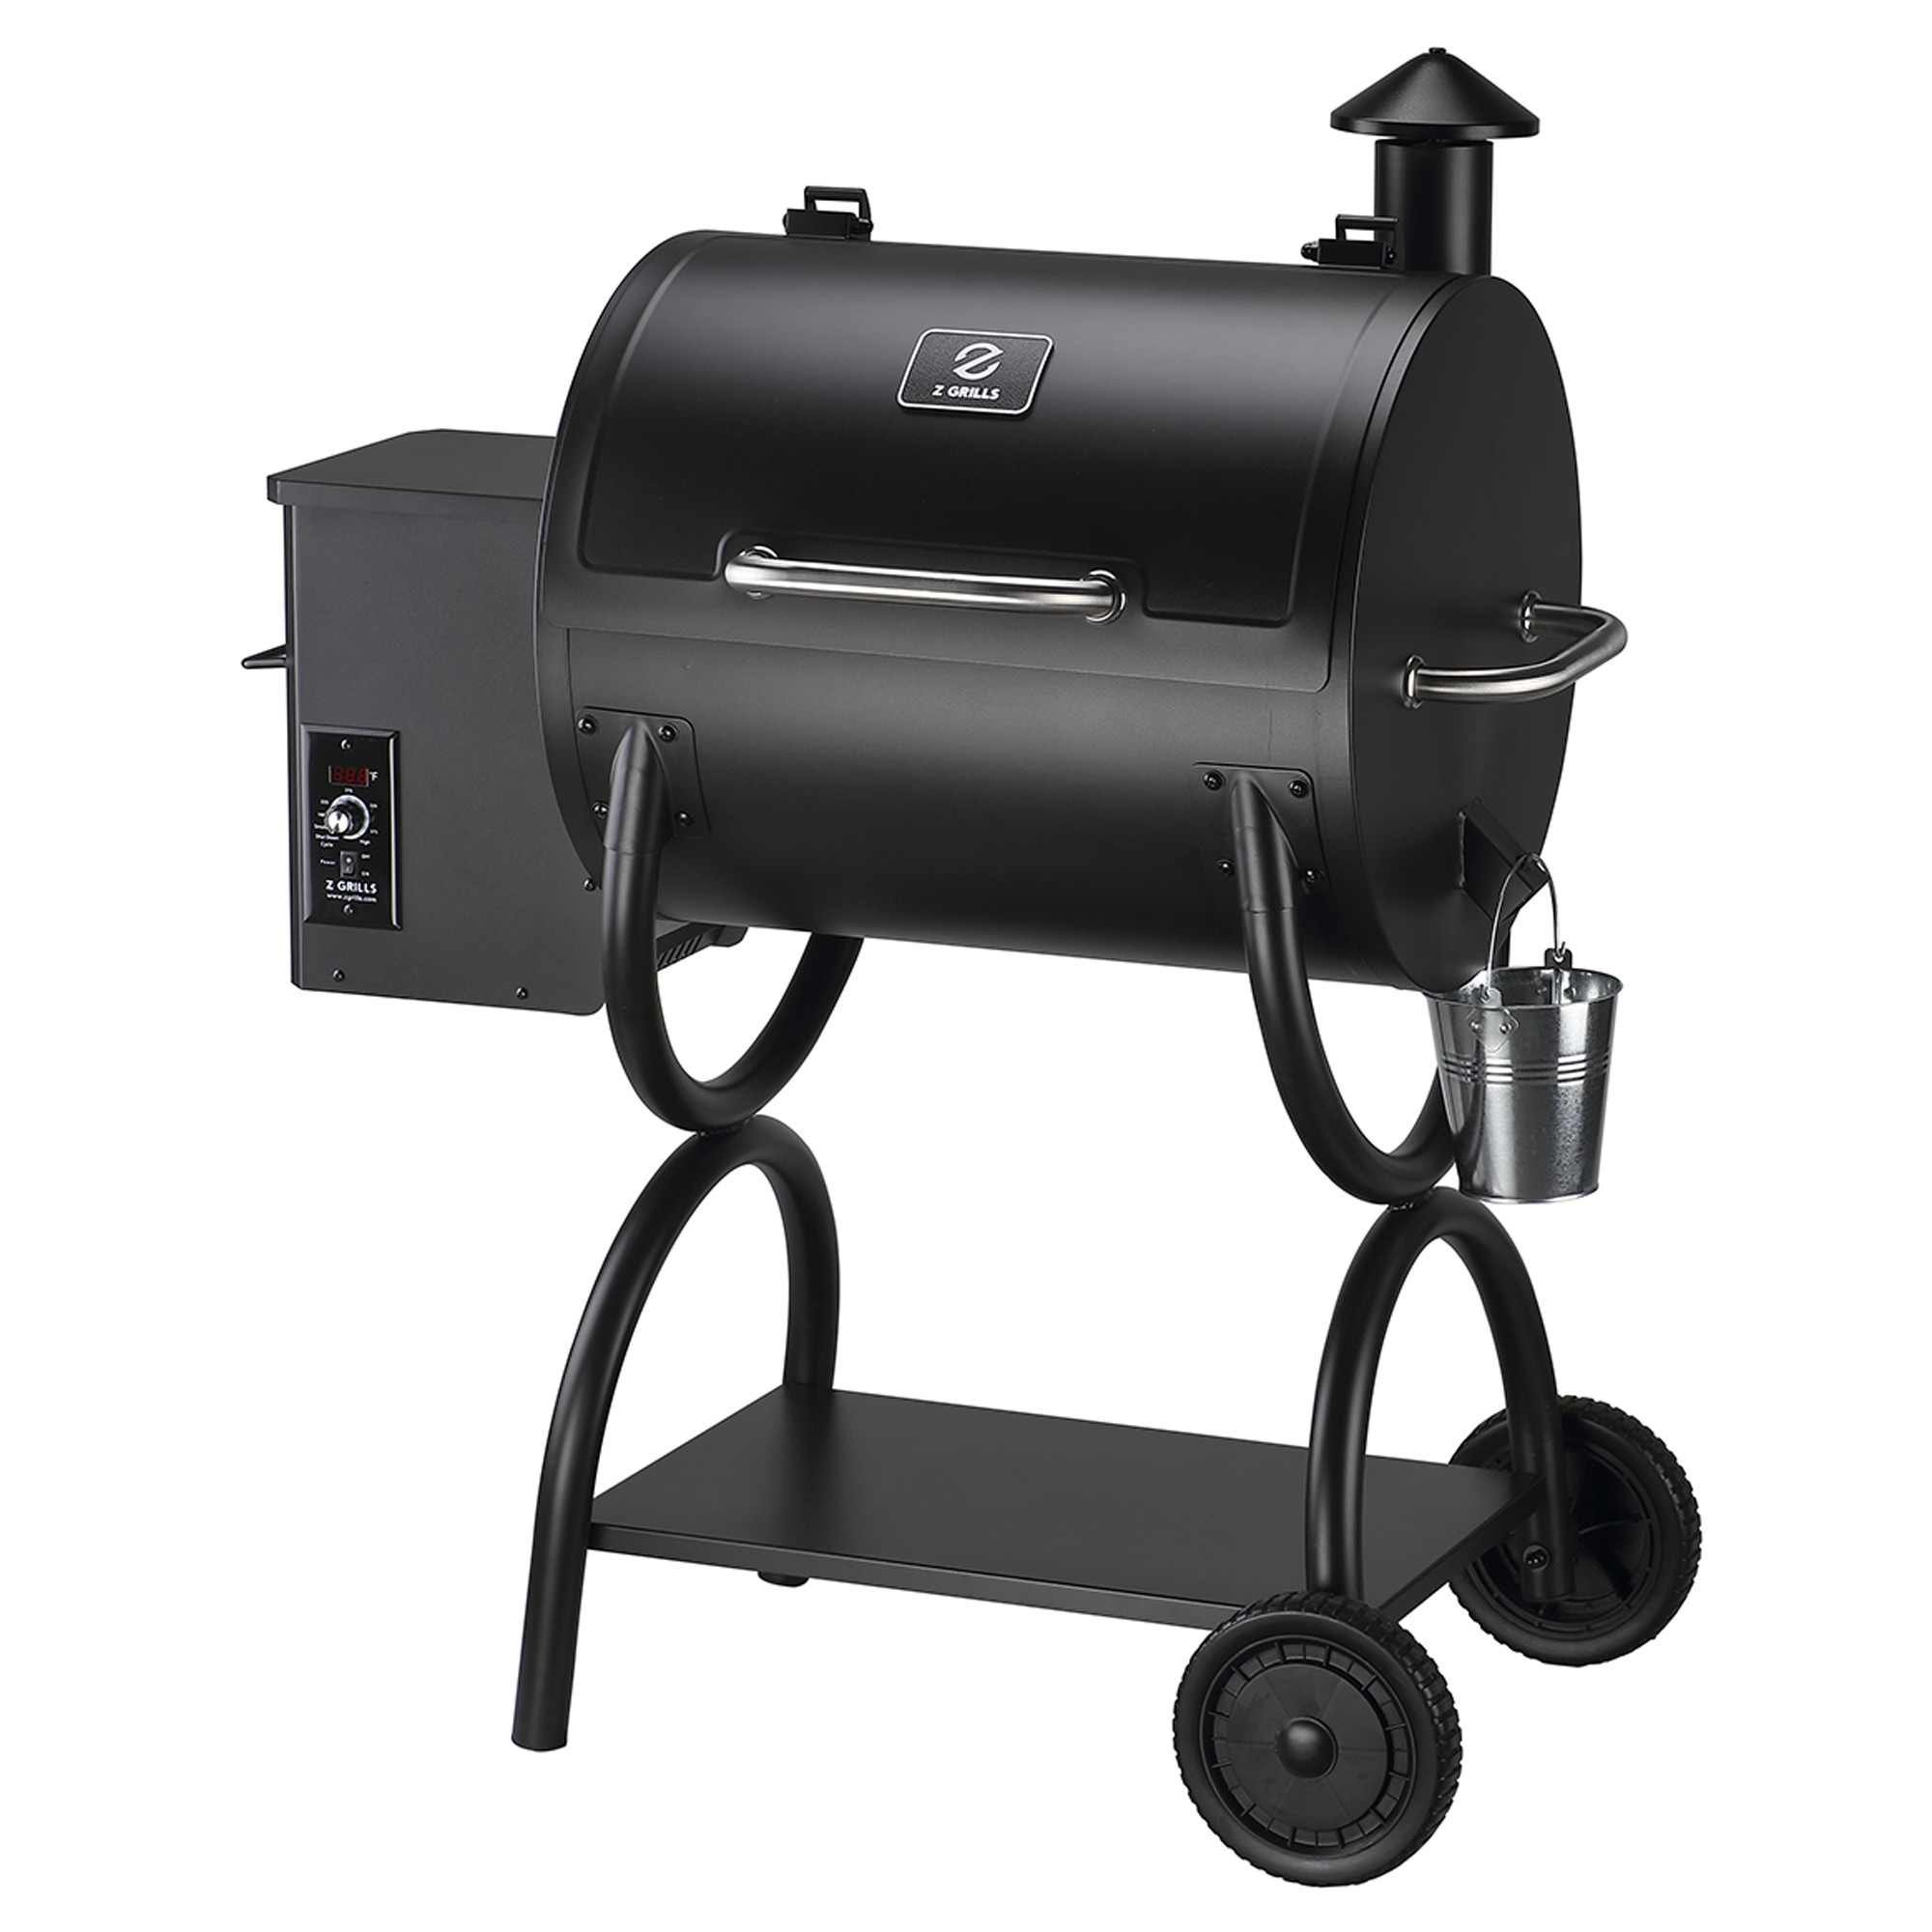 Z GRILLS ZPG-550A 590 sq. in. Wood Pellet Grill and Smoker 7-in-1 BBQ Black - image 1 of 8